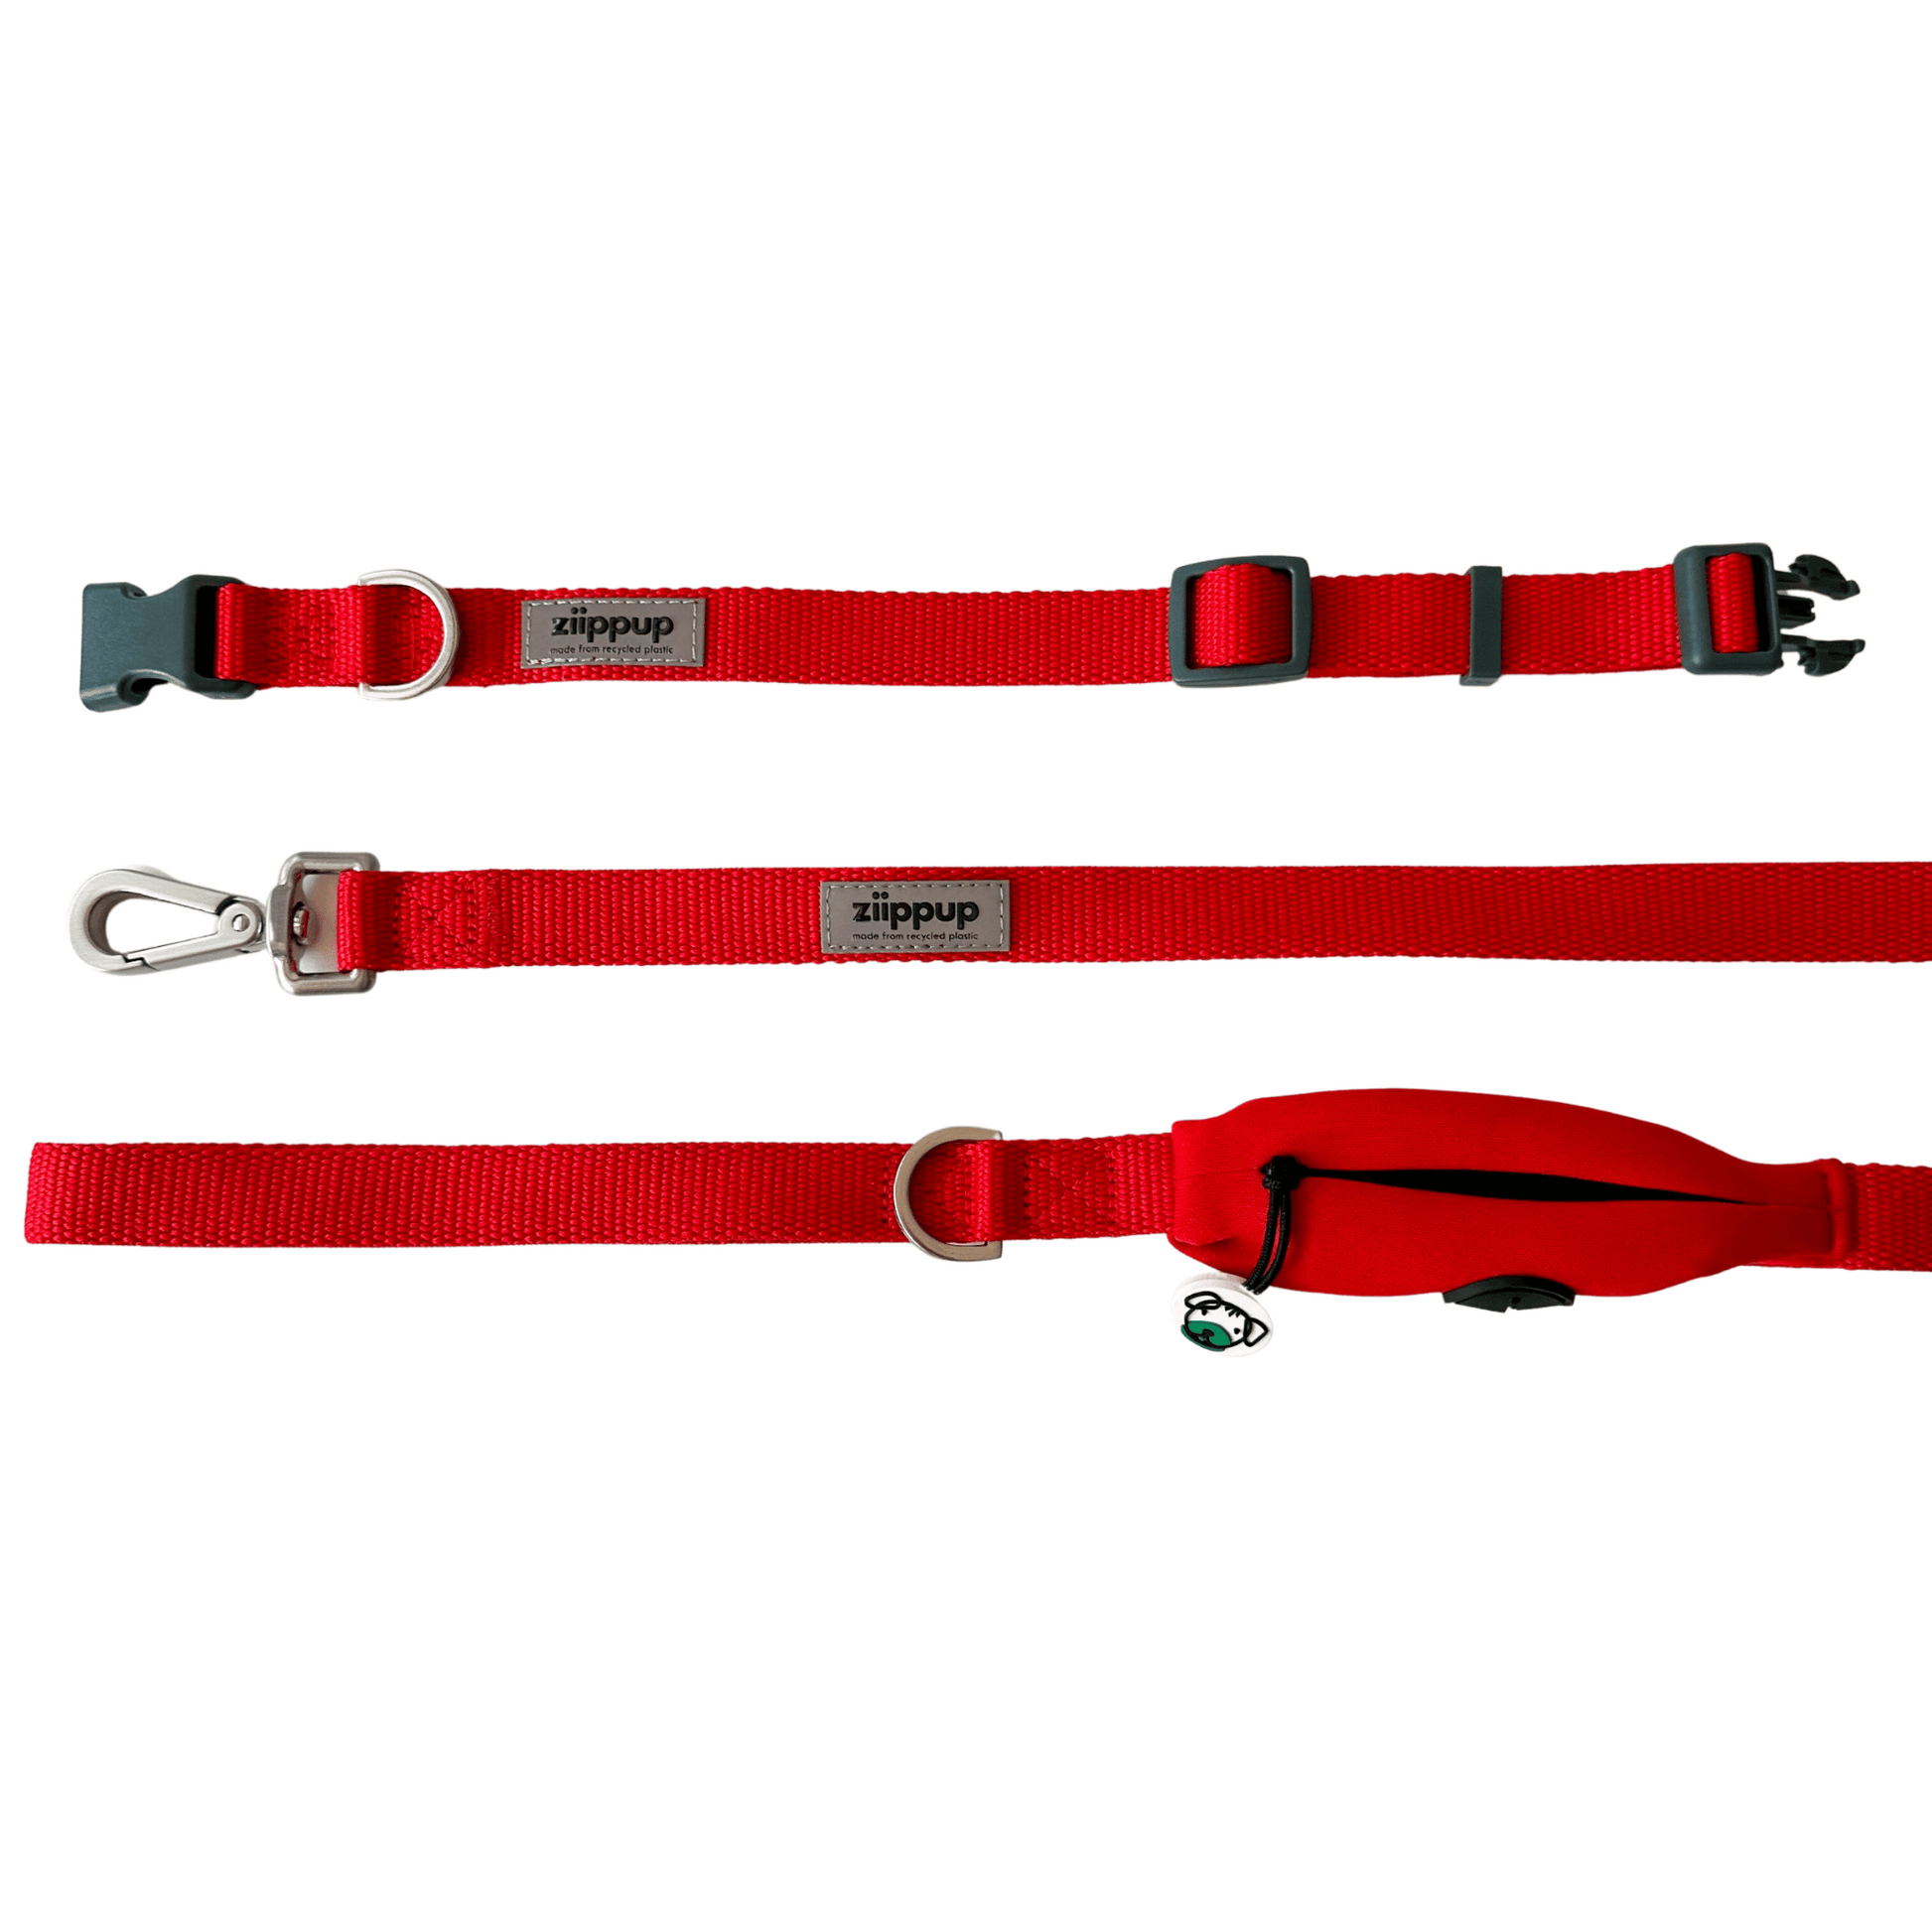 Matching red dog collar and lead, Ziippup